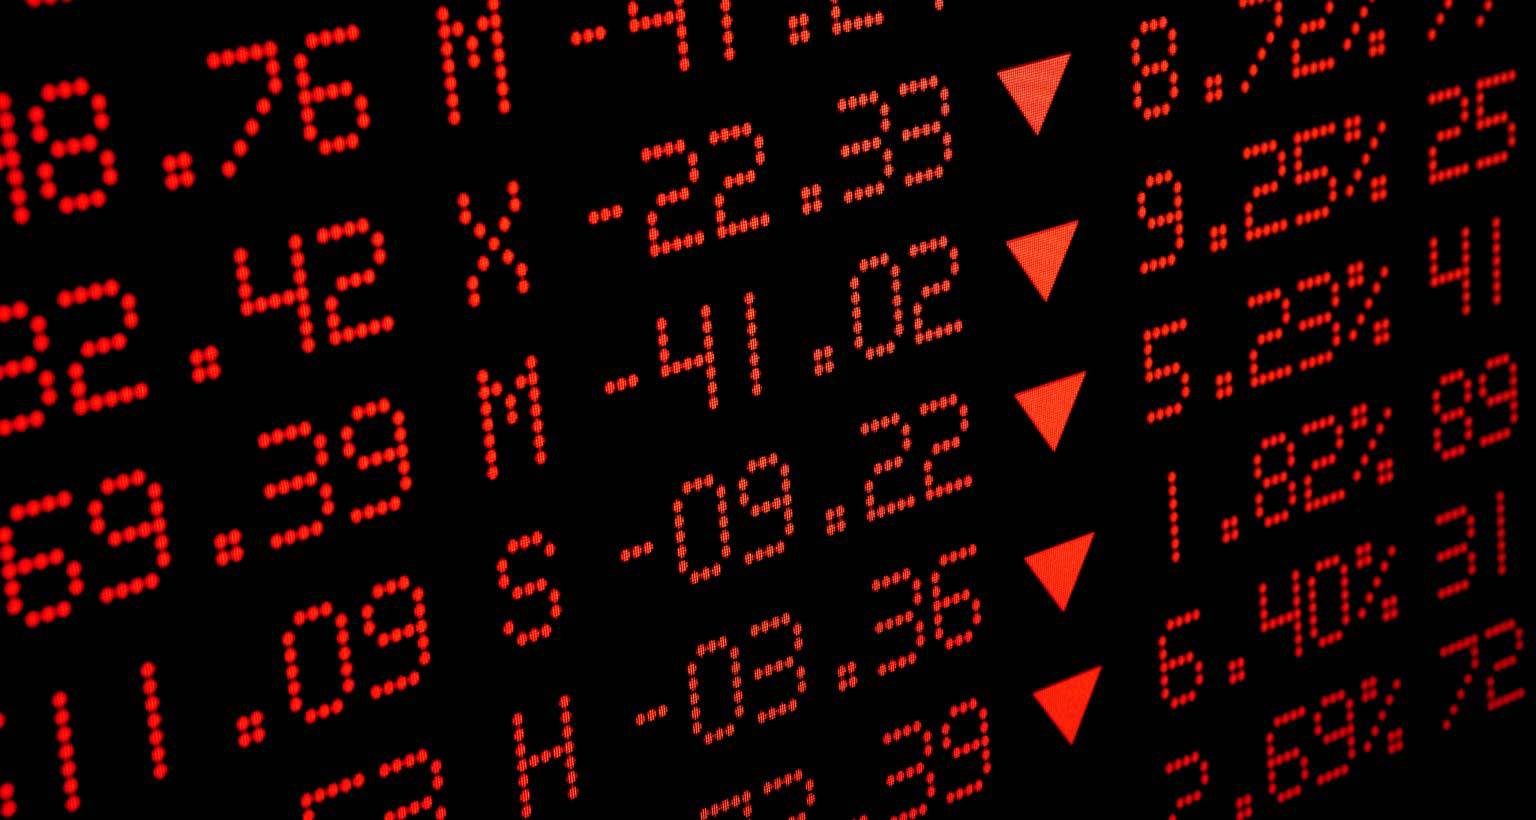 screen showing stock market prices in red